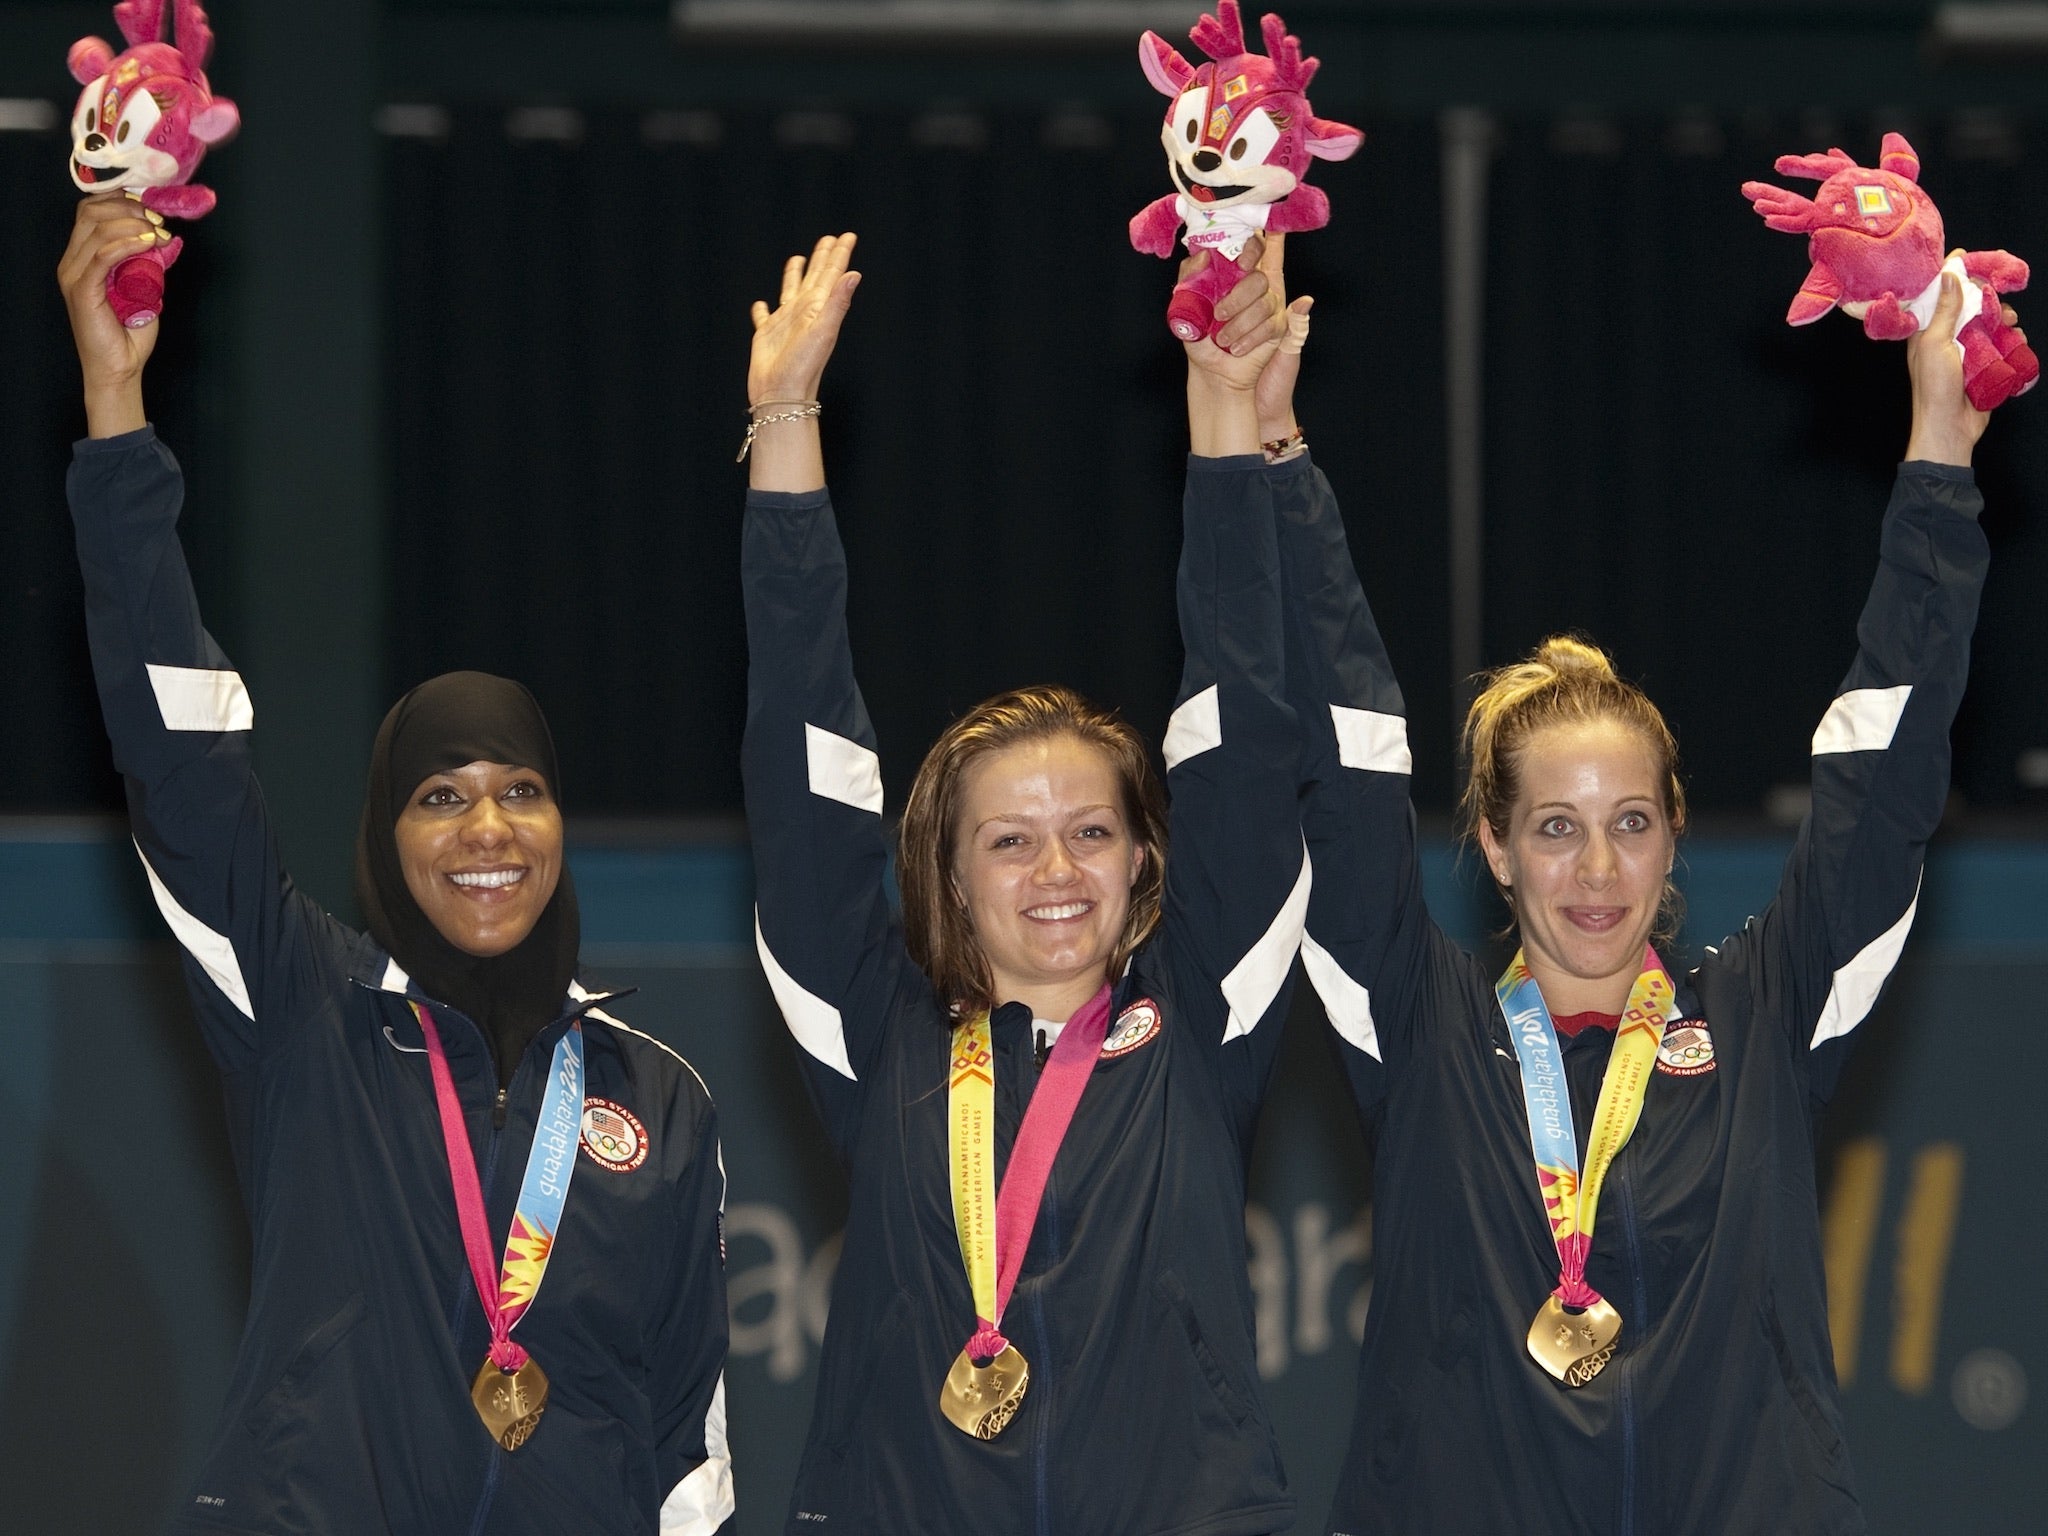 Ibtihaj Muhammad (left) qualified on Saturday for the 2016 Olympic Games and is set to be the first American Olympian to compete in a hijab.